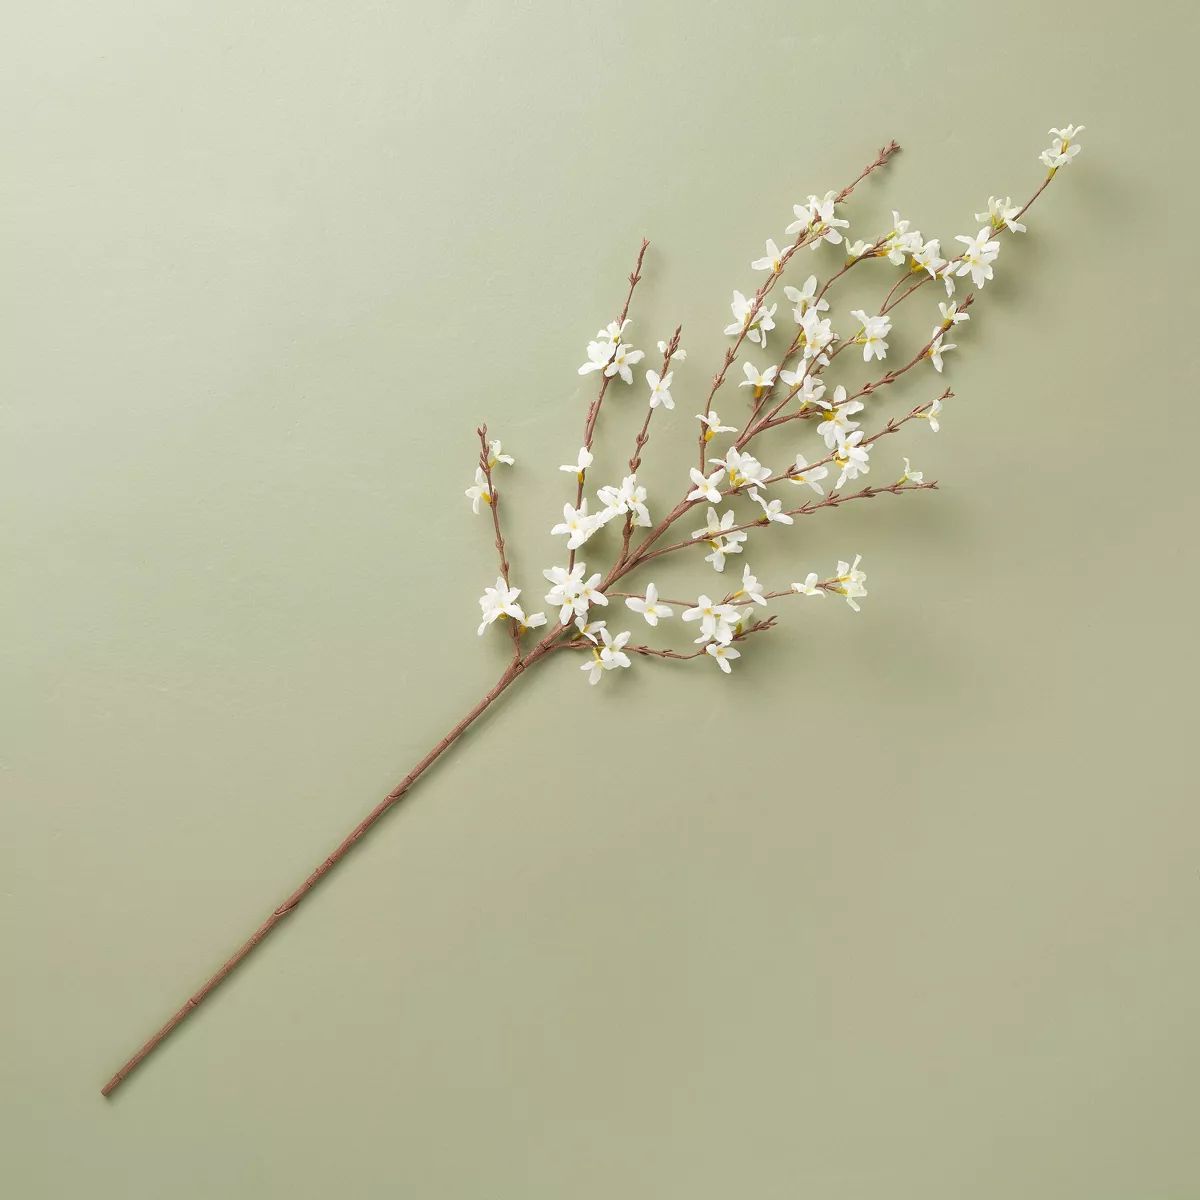 Faux Forsythia Flowering Branch - Hearth & Hand™ with Magnolia | Target